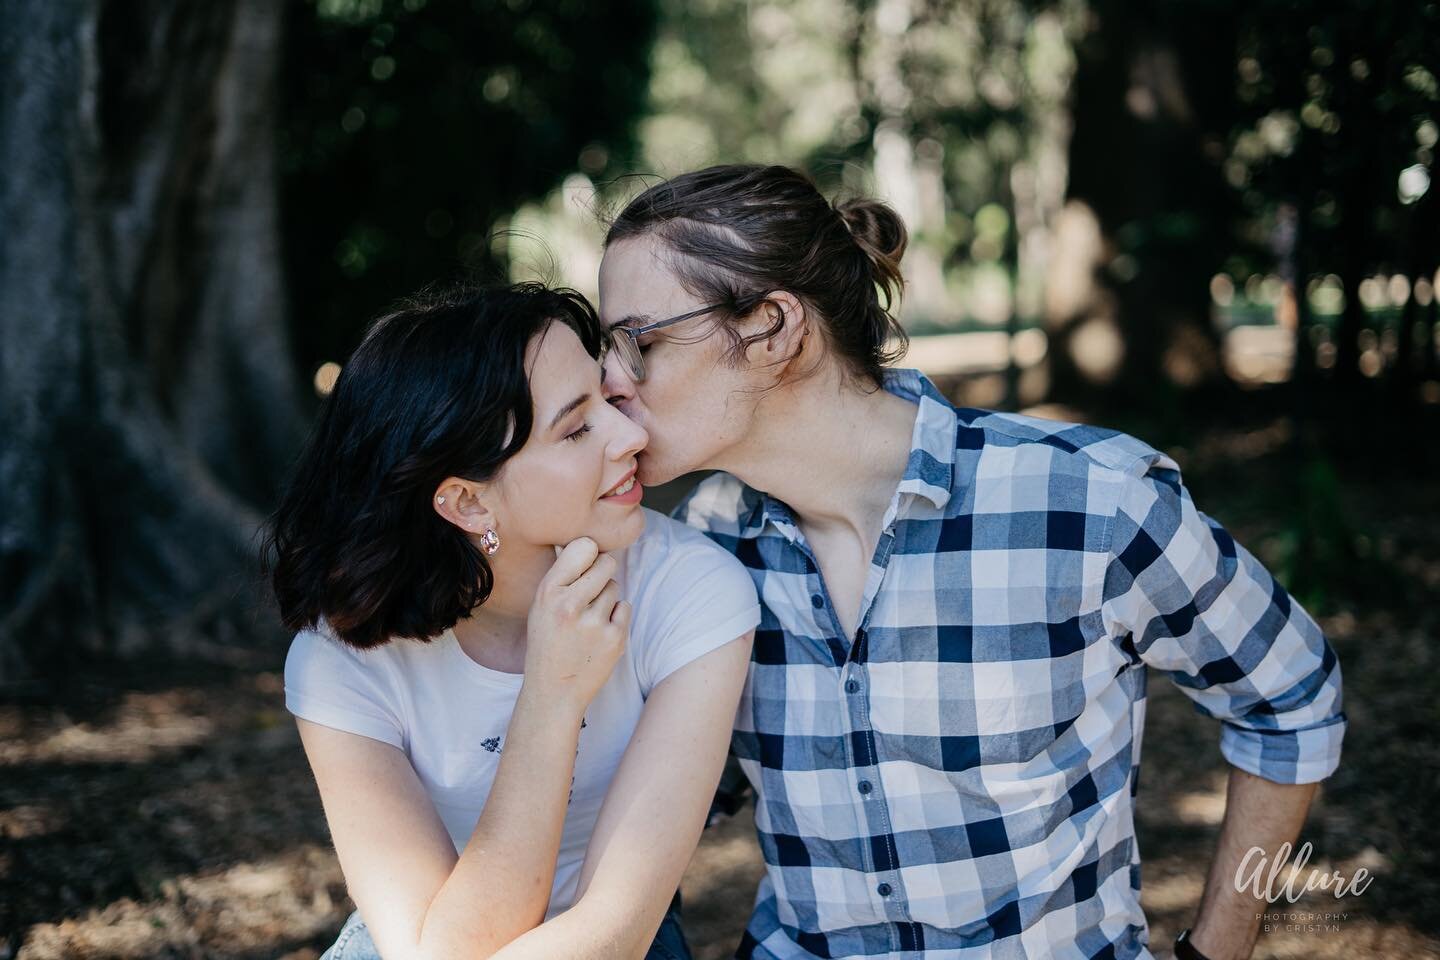 A sweet moment with Cassie &amp; Jacob during their couples&rsquo; portrait session.

Cassie was the winner of Allure&rsquo;s 100 follower giveaway and we were finally able to make it happen! These two are one of the most playful couples I&rsquo;ve m